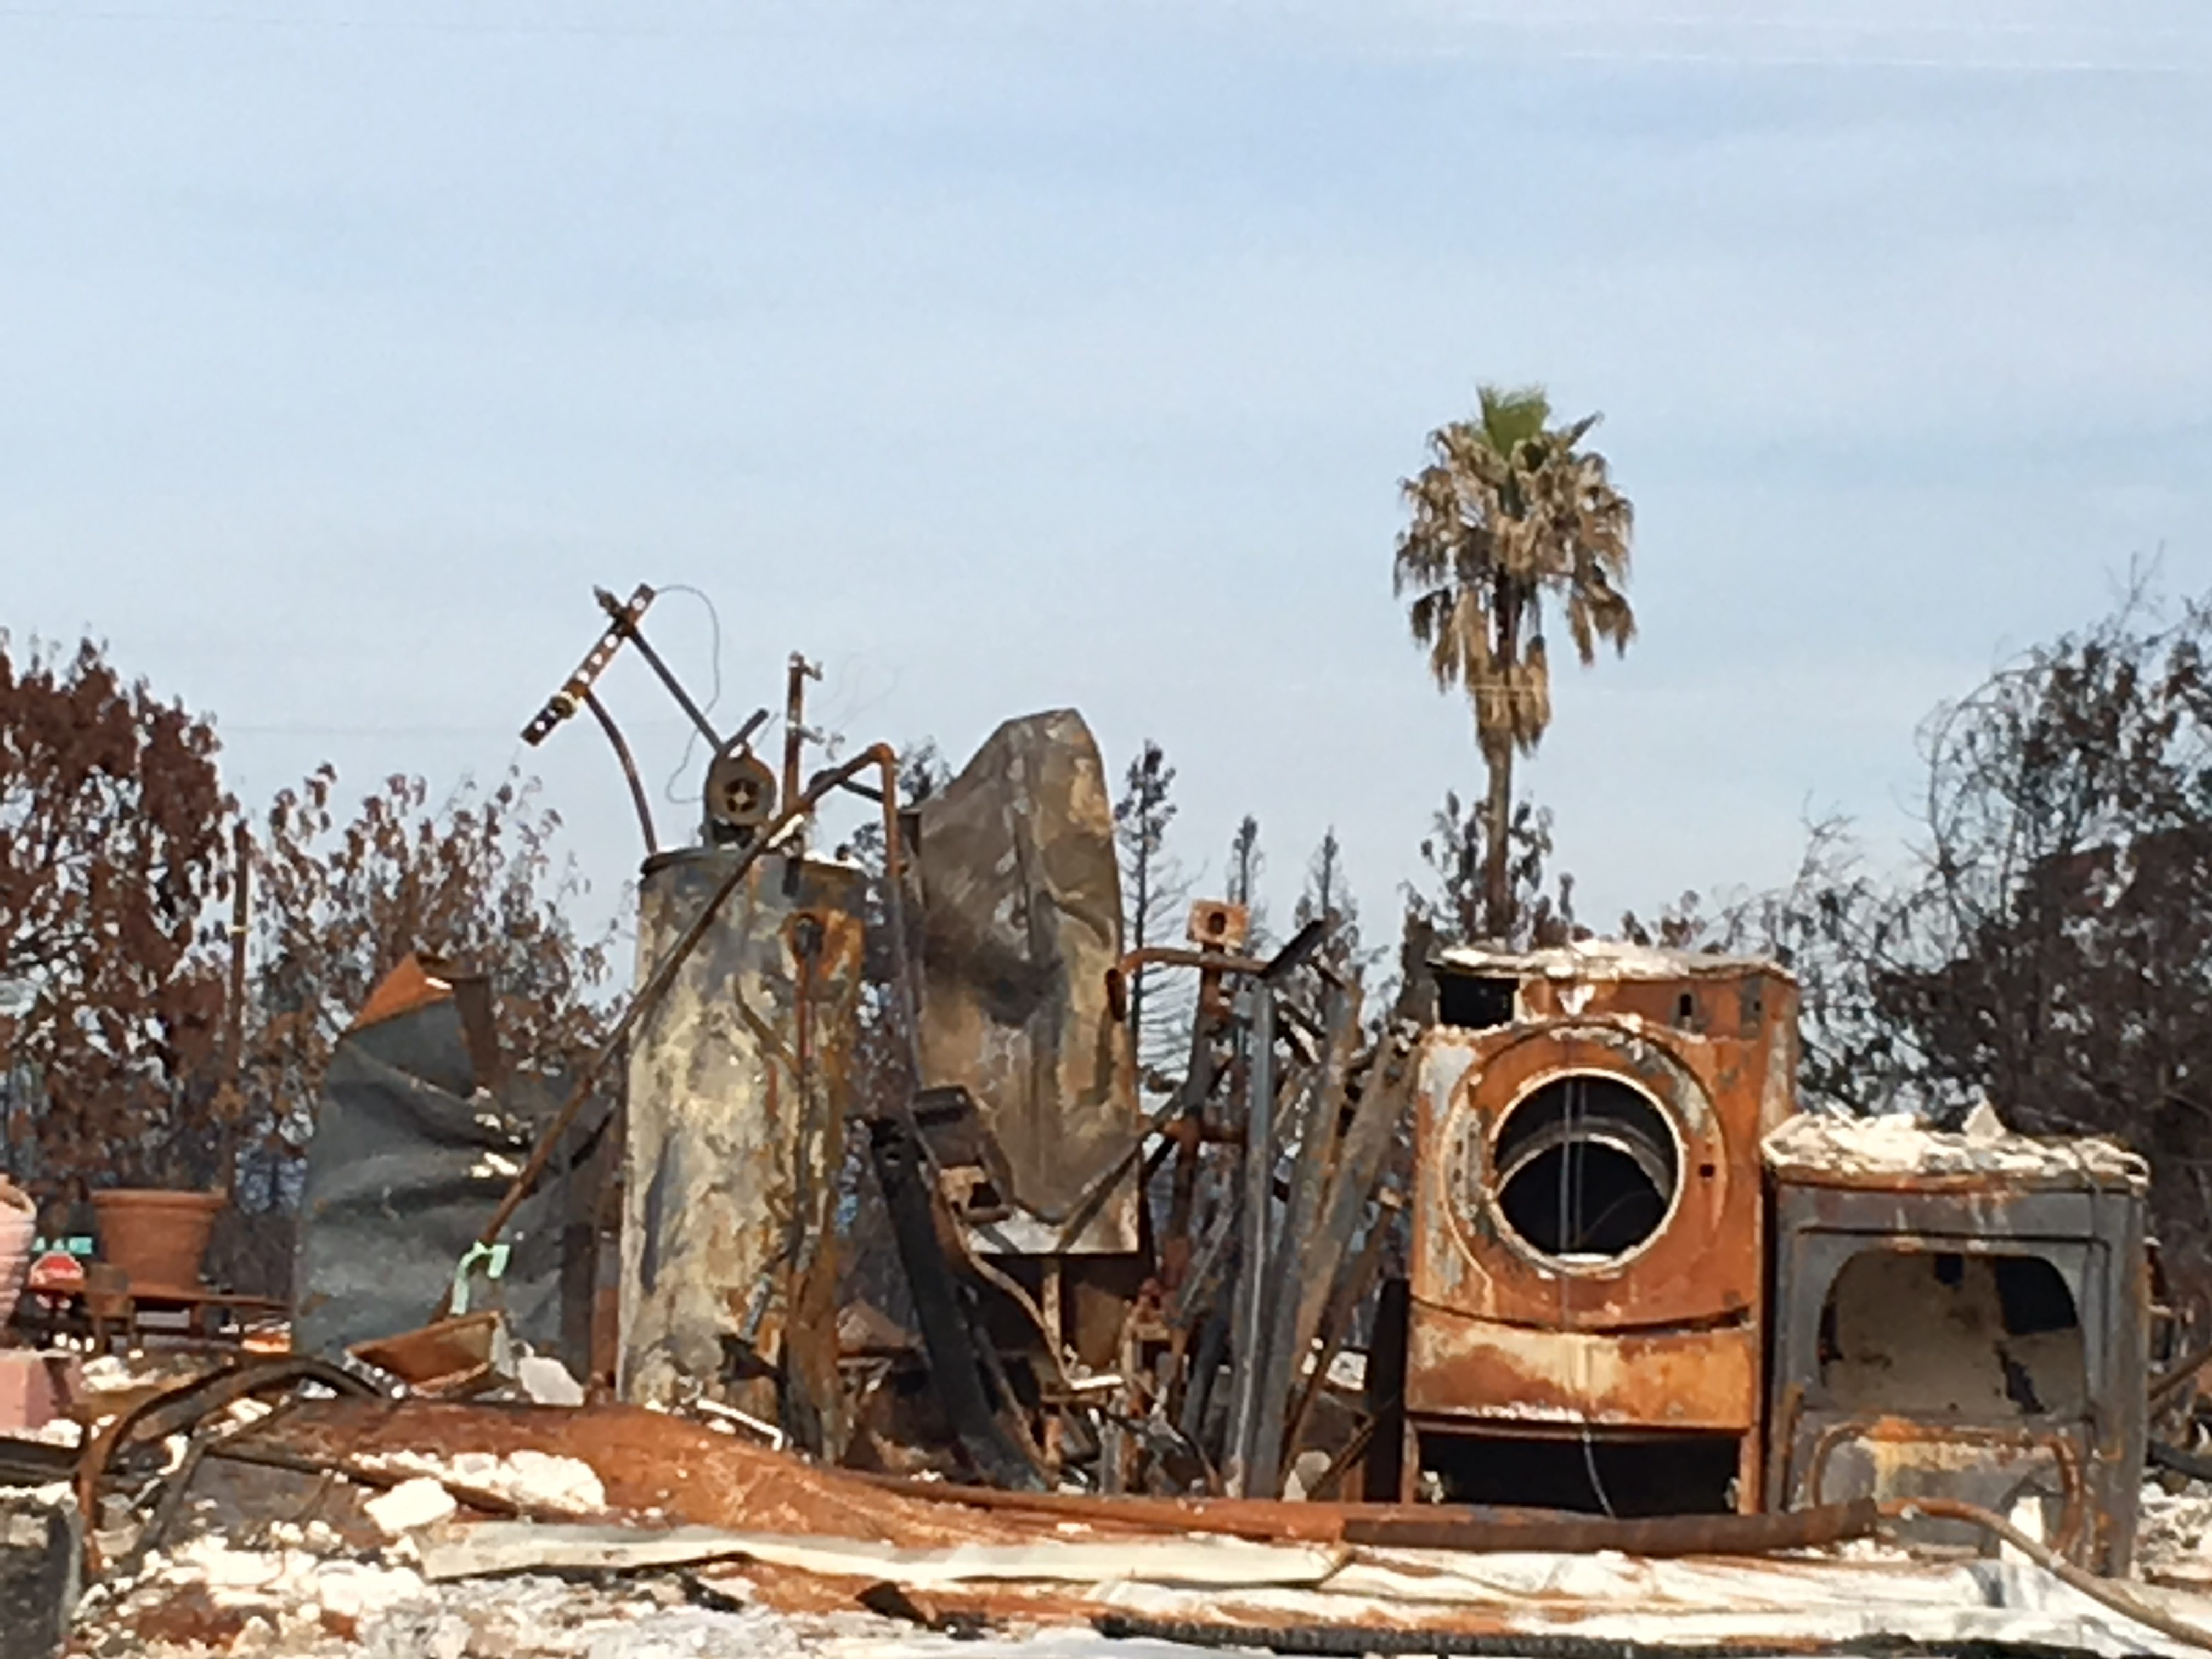 Burned appliances in Coffey Park after the 2017 wildfires in Santa Rosa — one of many blazes fueling a Capitol debate about fire insurance. (Photo by Shawn Hubler for CALmatter)